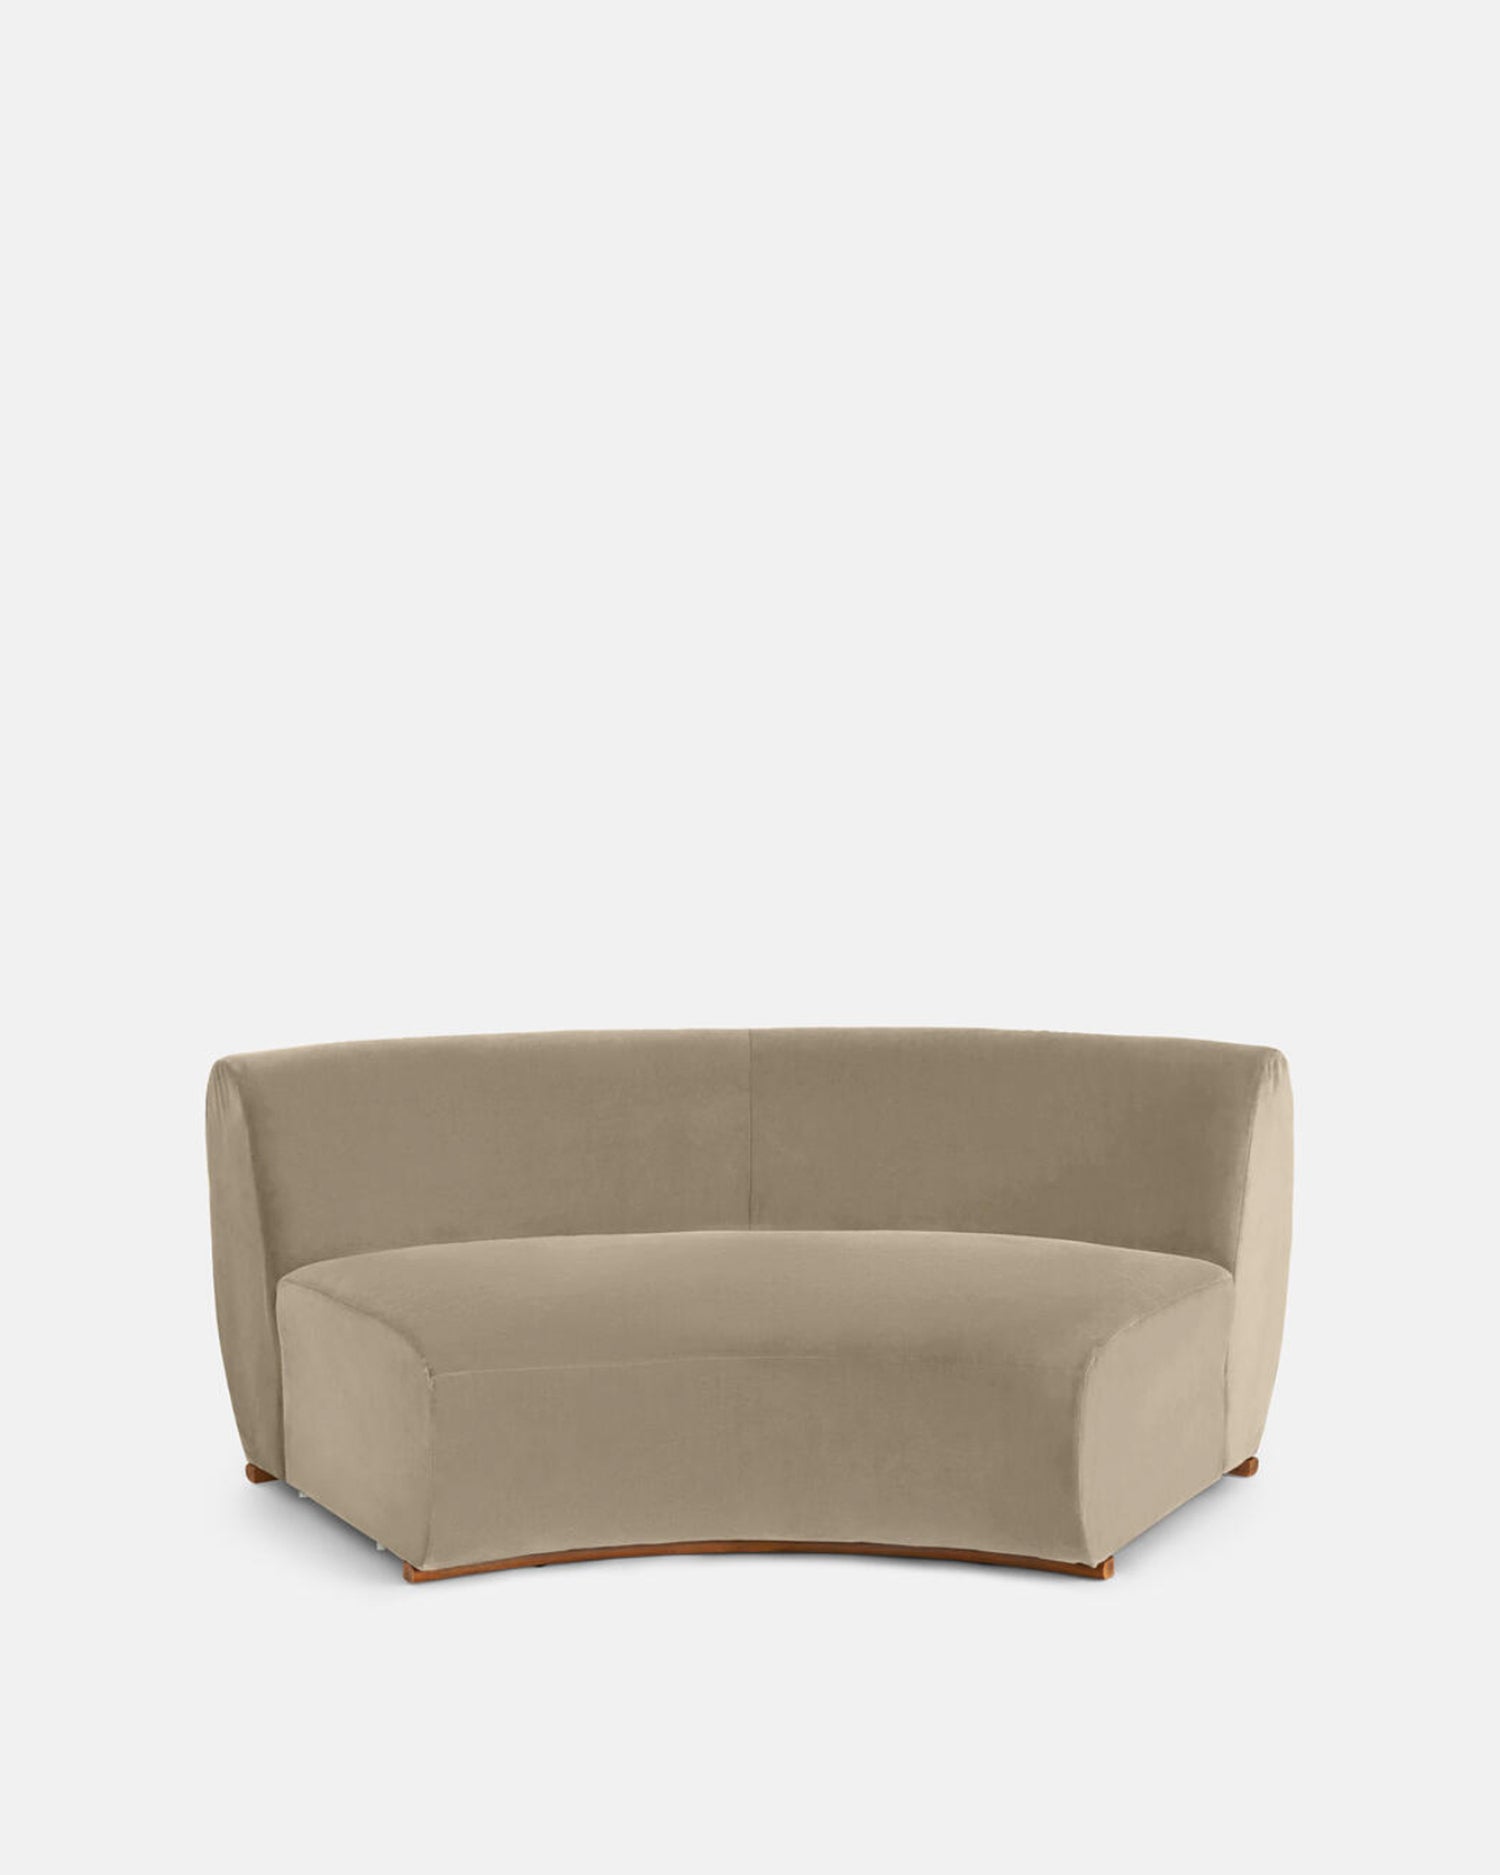 Aline Serpentine Sectional Sofa - Four Seater, US